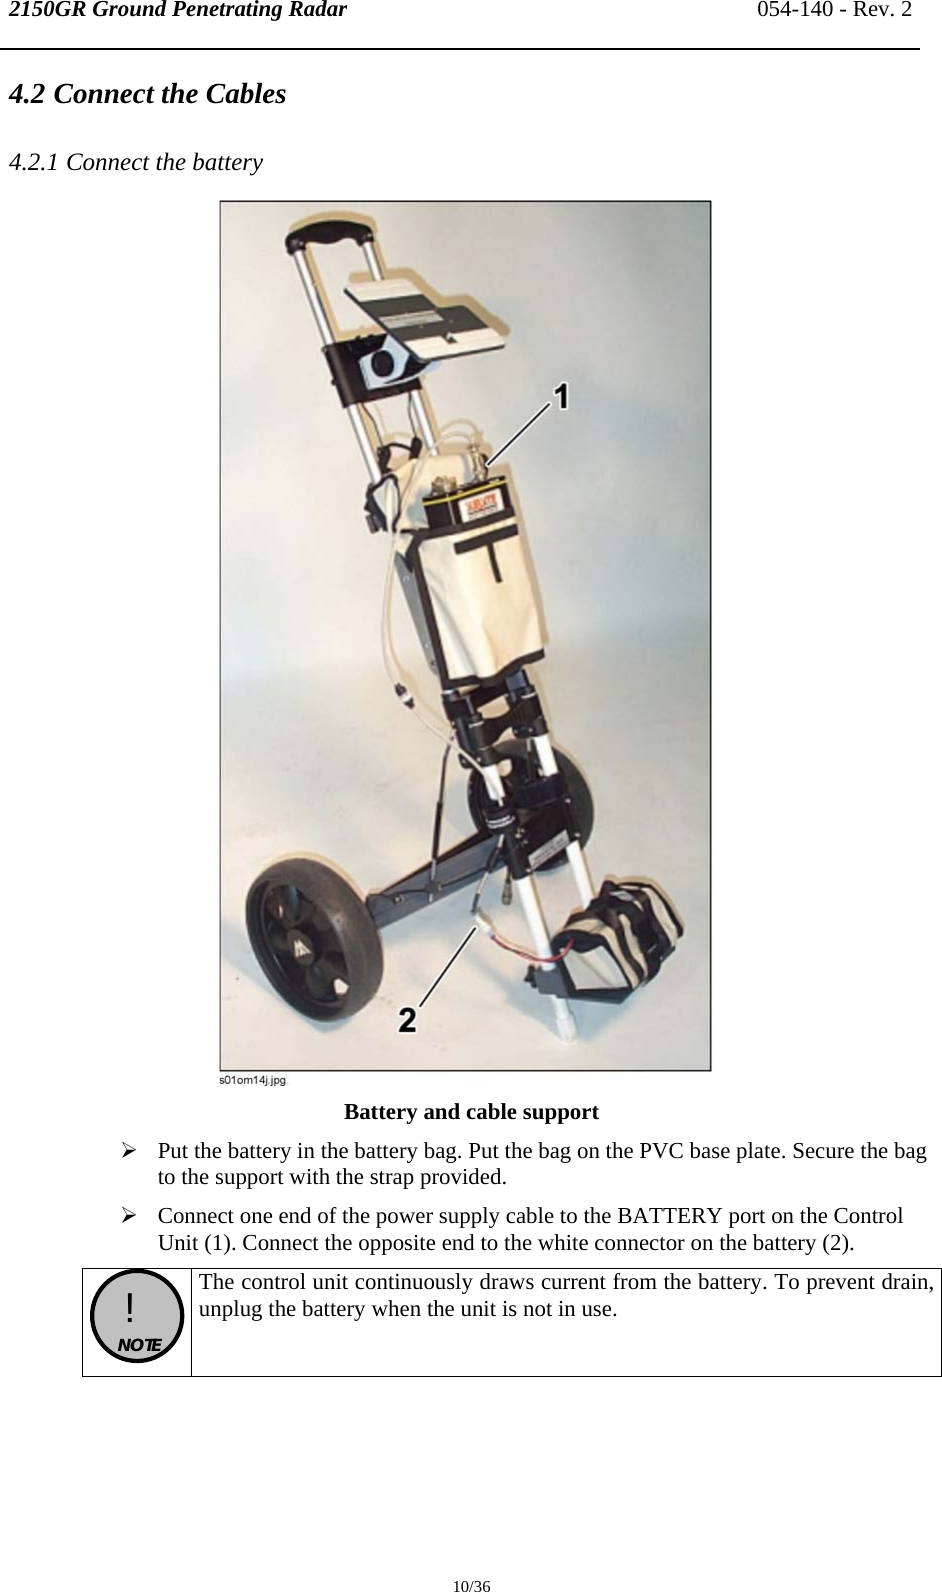 2150GR Ground Penetrating Radar 054-140 - Rev. 2  10/36 4.2 Connect the Cables 4.2.1 Connect the battery  Battery and cable support ¾ Put the battery in the battery bag. Put the bag on the PVC base plate. Secure the bag to the support with the strap provided. ¾ Connect one end of the power supply cable to the BATTERY port on the Control Unit (1). Connect the opposite end to the white connector on the battery (2).  !  NOTE  The control unit continuously draws current from the battery. To prevent drain, unplug the battery when the unit is not in use.  